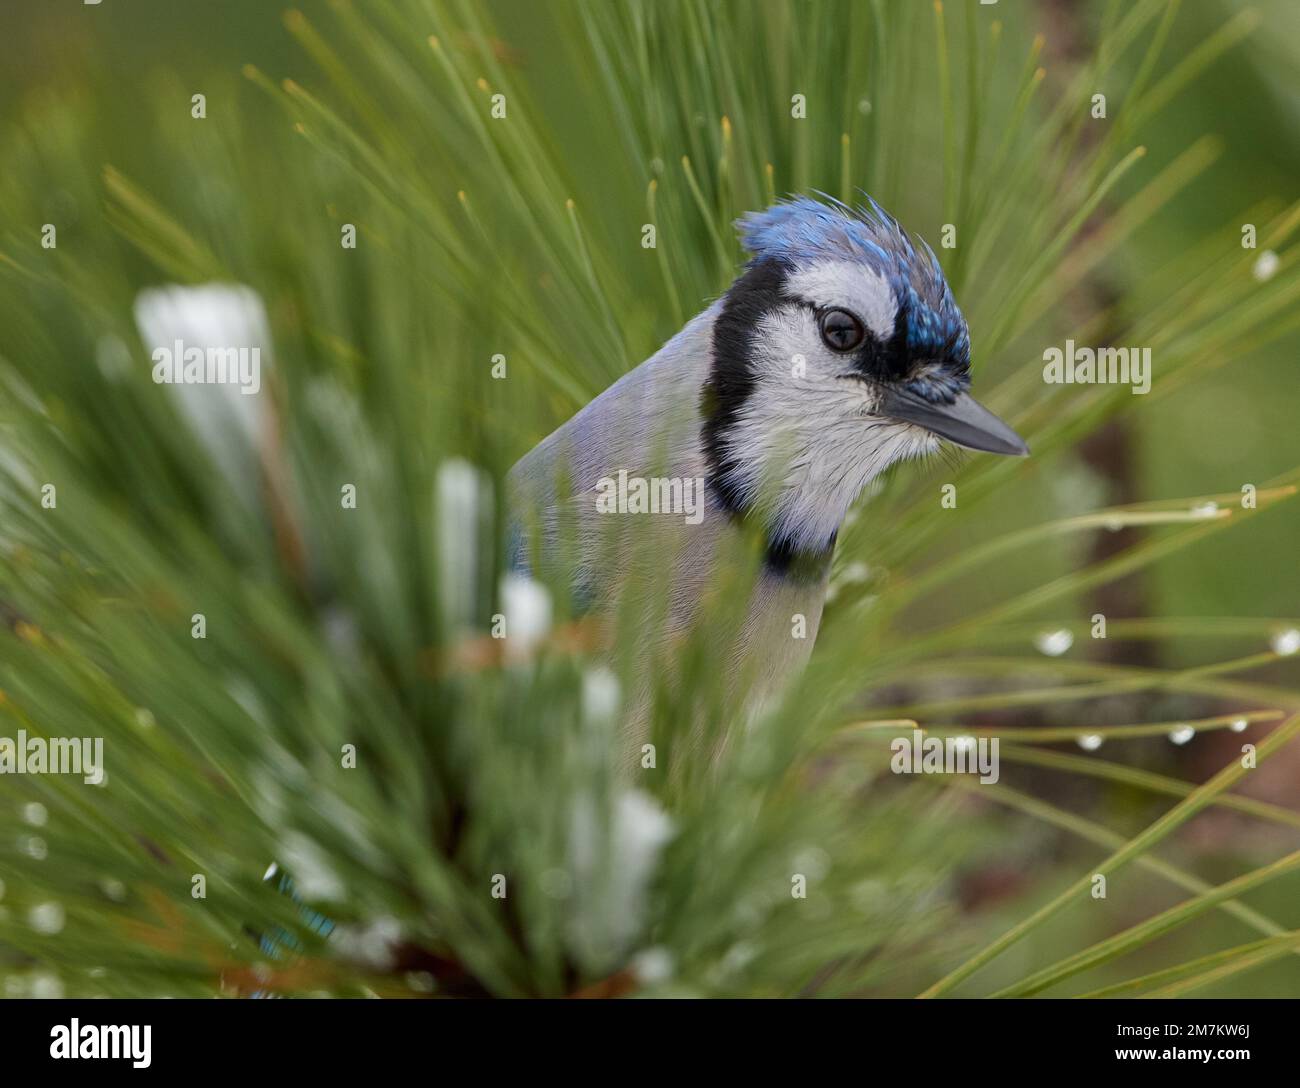 A close-up shot of a blue jay perched on a tree on a blurred background Stock Photo